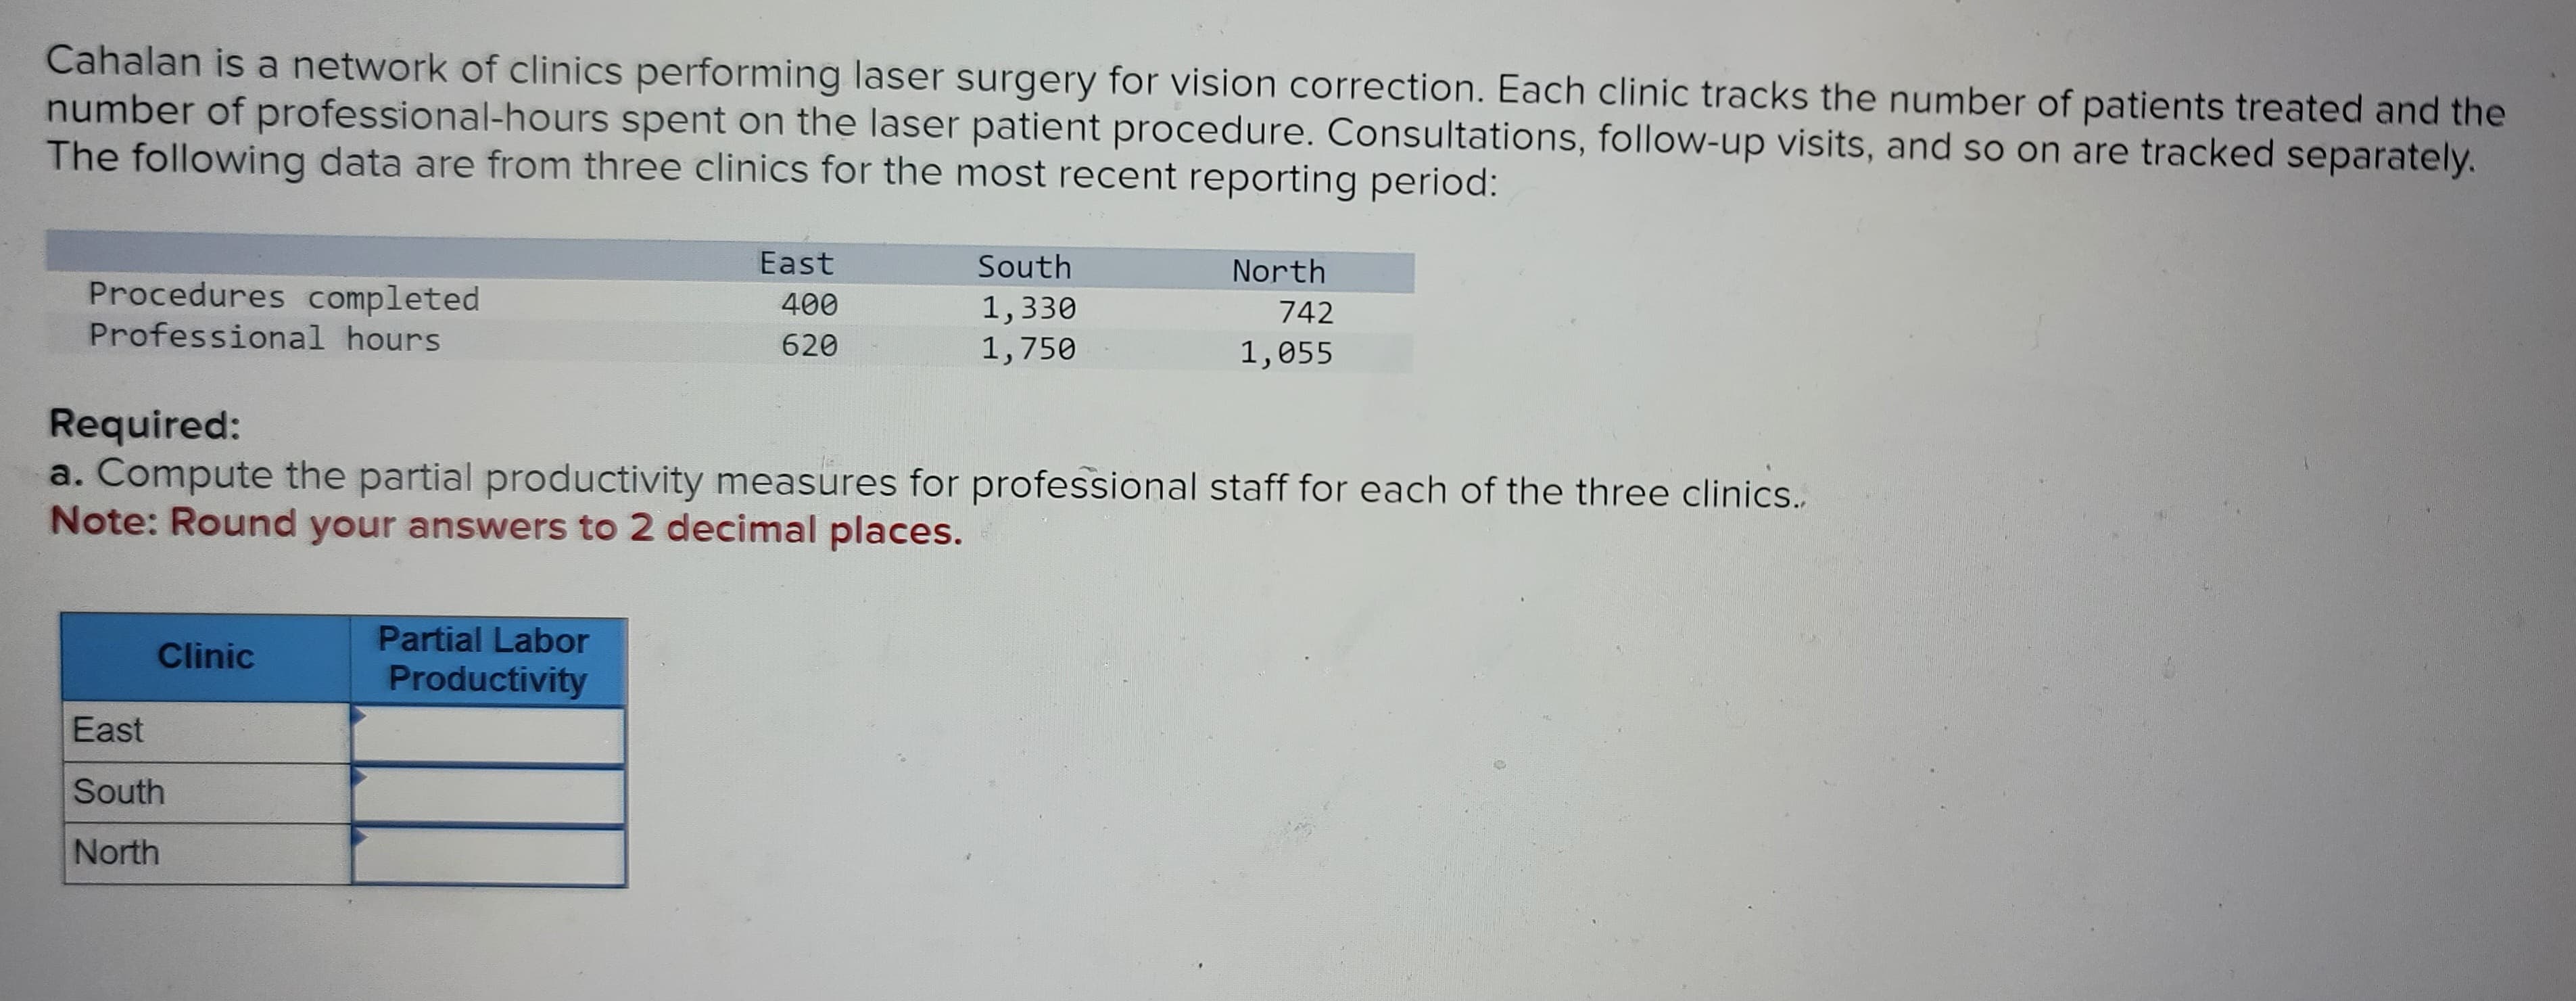 Cahalan is a network of clinics performing laser surgery for vision correction. Each clinic tracks the number of patients treated and the
number of professional-hours spent on the laser patient procedure. Consultations, follow-up visits, and so on are tracked separately.
The following data are from three clinics for the most recent reporting period:
Procedures completed
Professional hours
Clinic
East
South
North
East
400
620
Required:
a. Compute the partial productivity measures for professional staff for each of the three clinics..
Note: Round your answers to 2 decimal places.
Partial Labor
Productivity
South
1,330
1,750
North
742
1,055